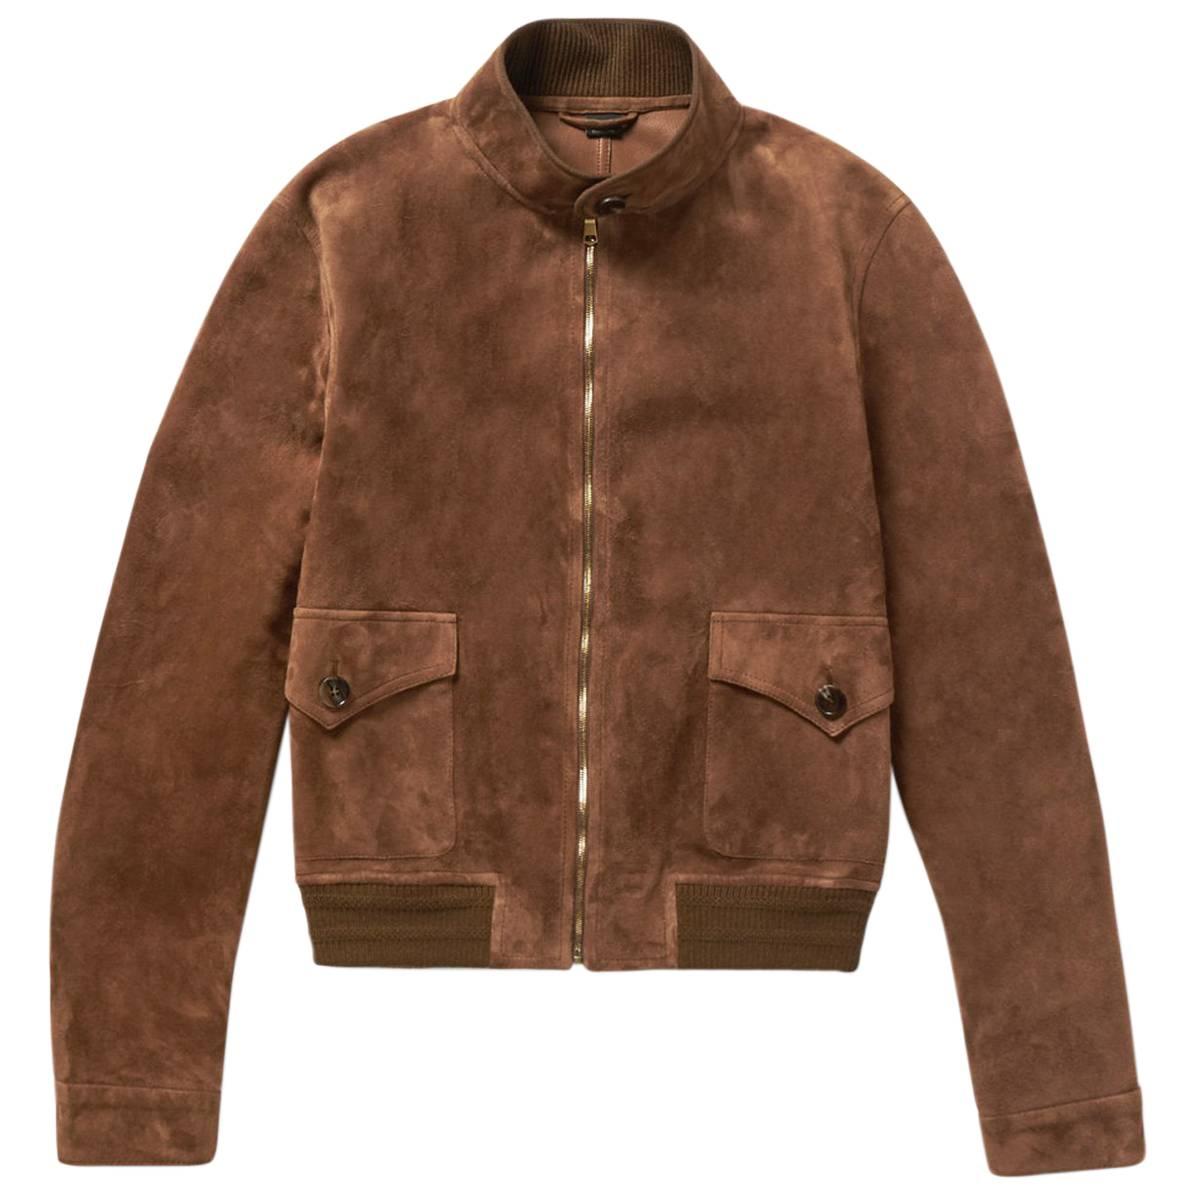 New Gucci Men's Goat Suede Brown Bomber Jacket  50 - US 40